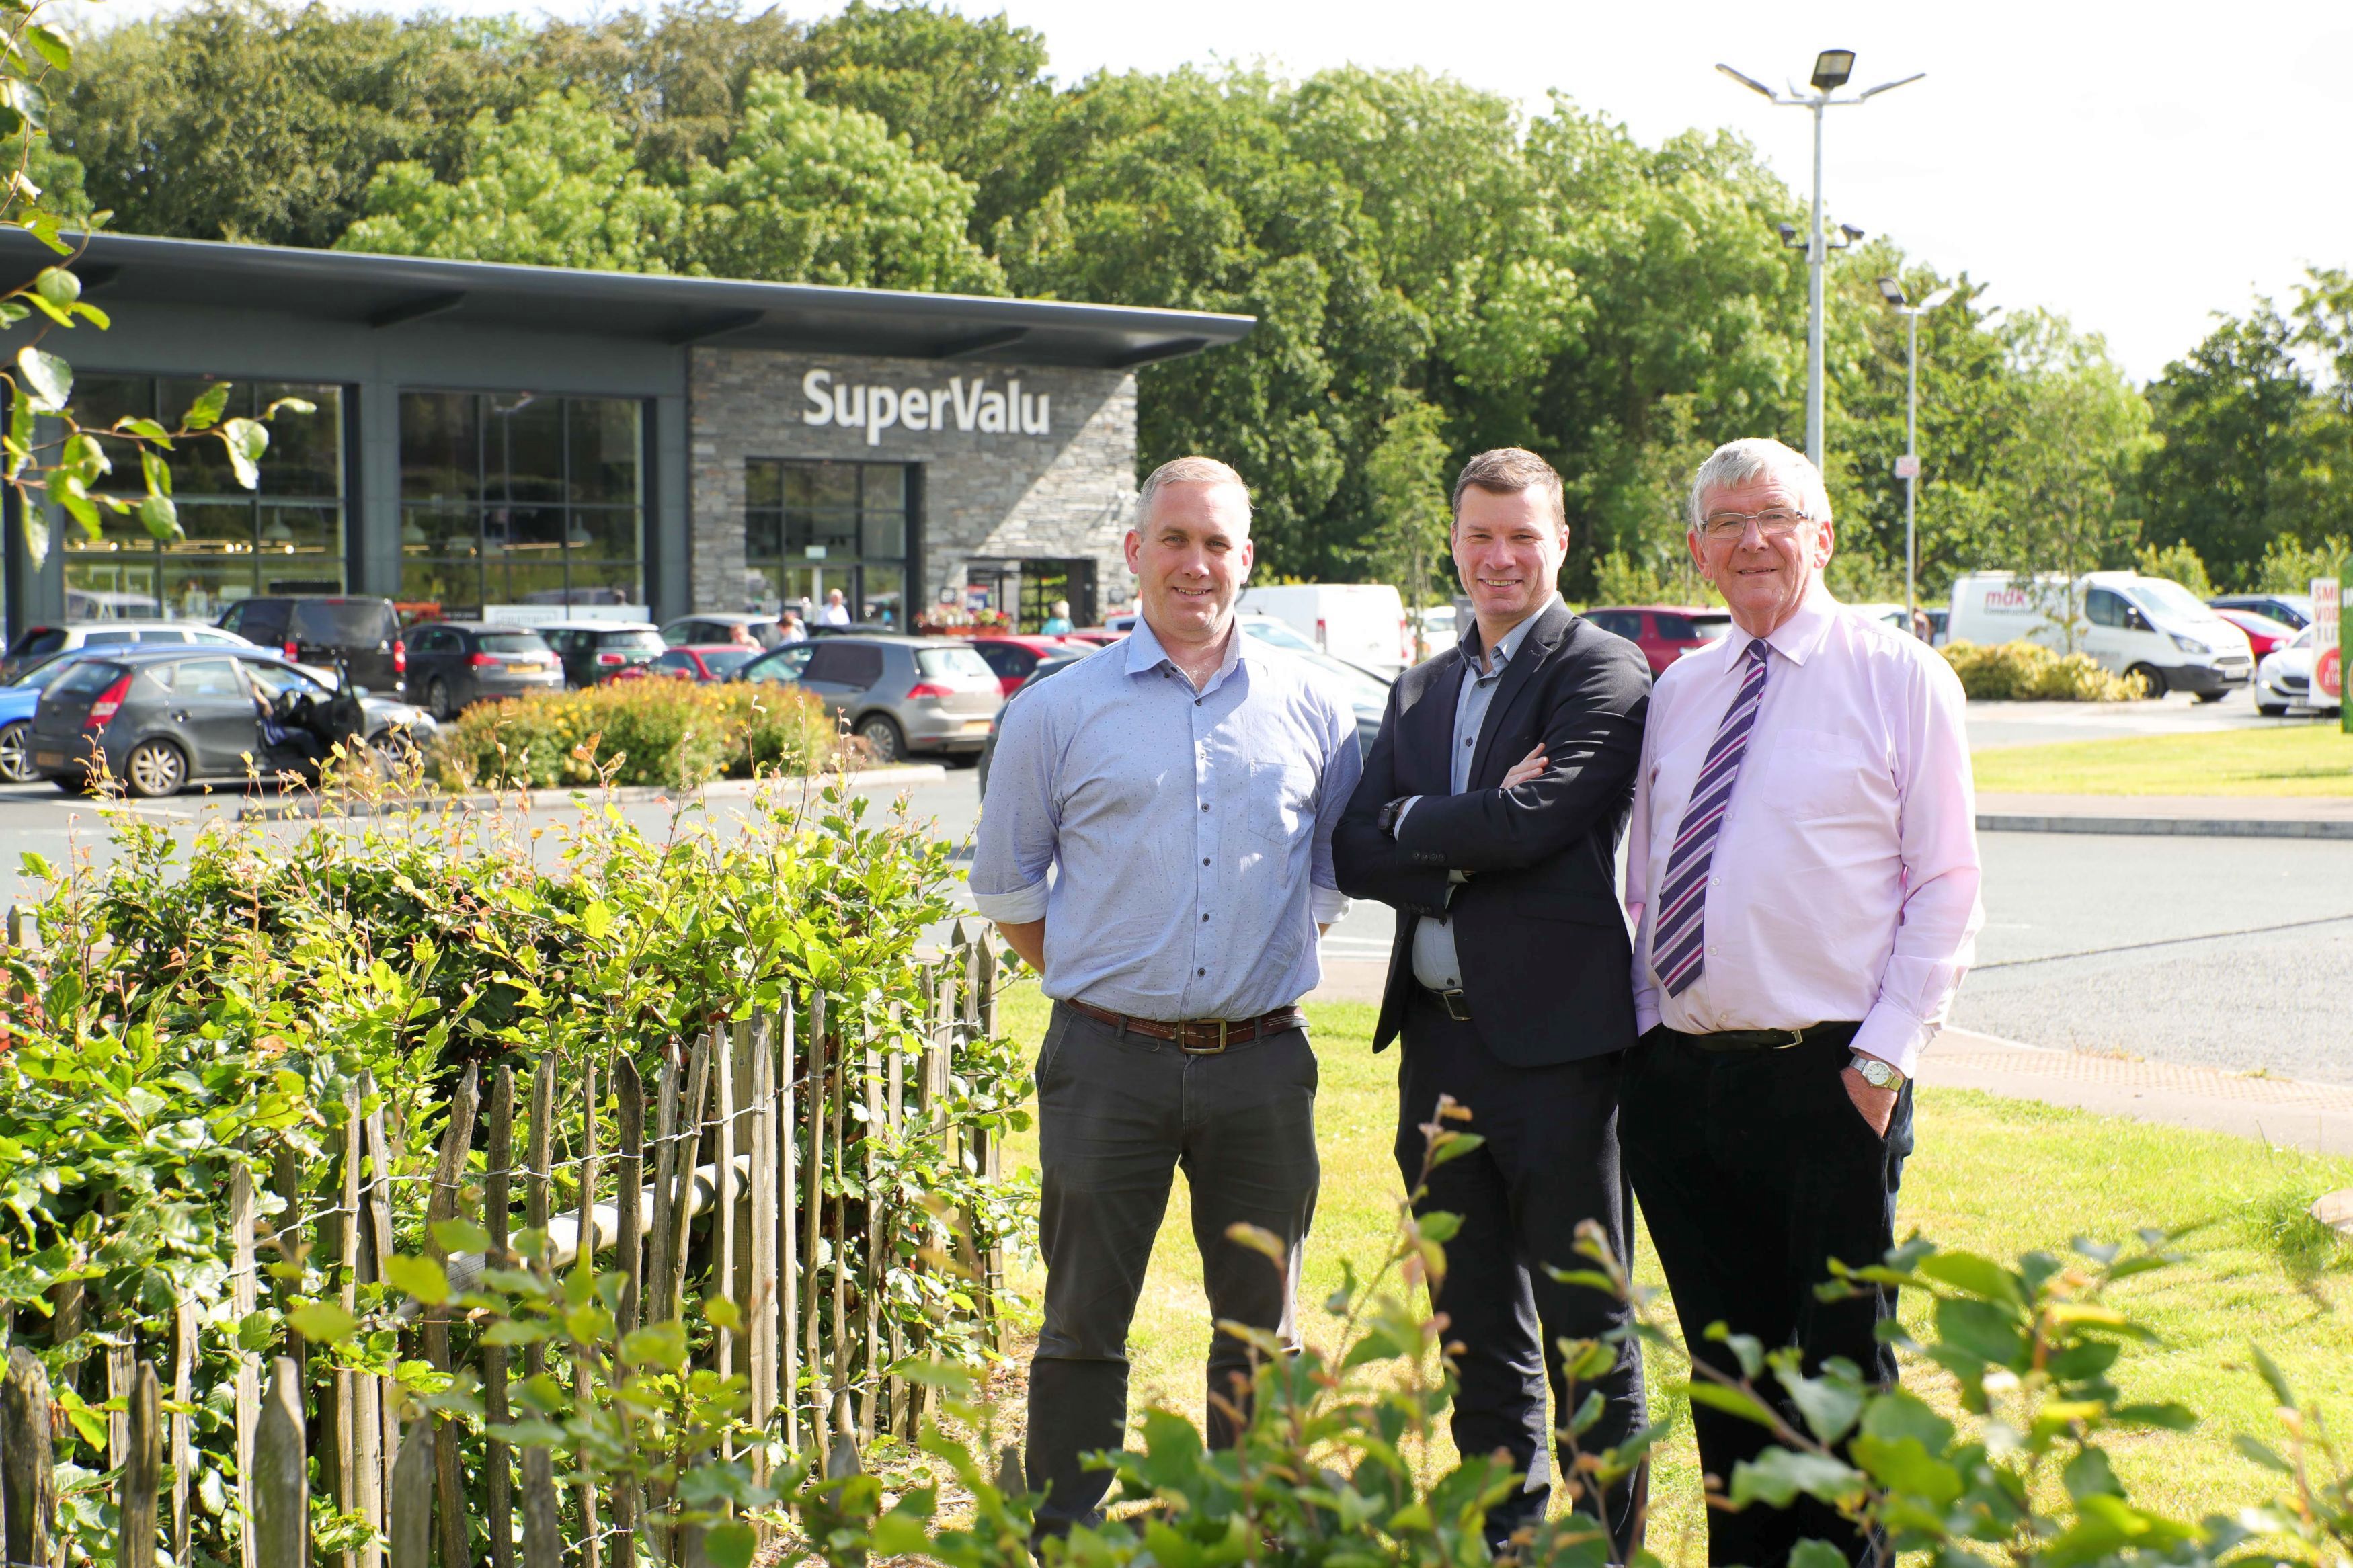 Supervalu retailers acquire prominent Co. Armagh store